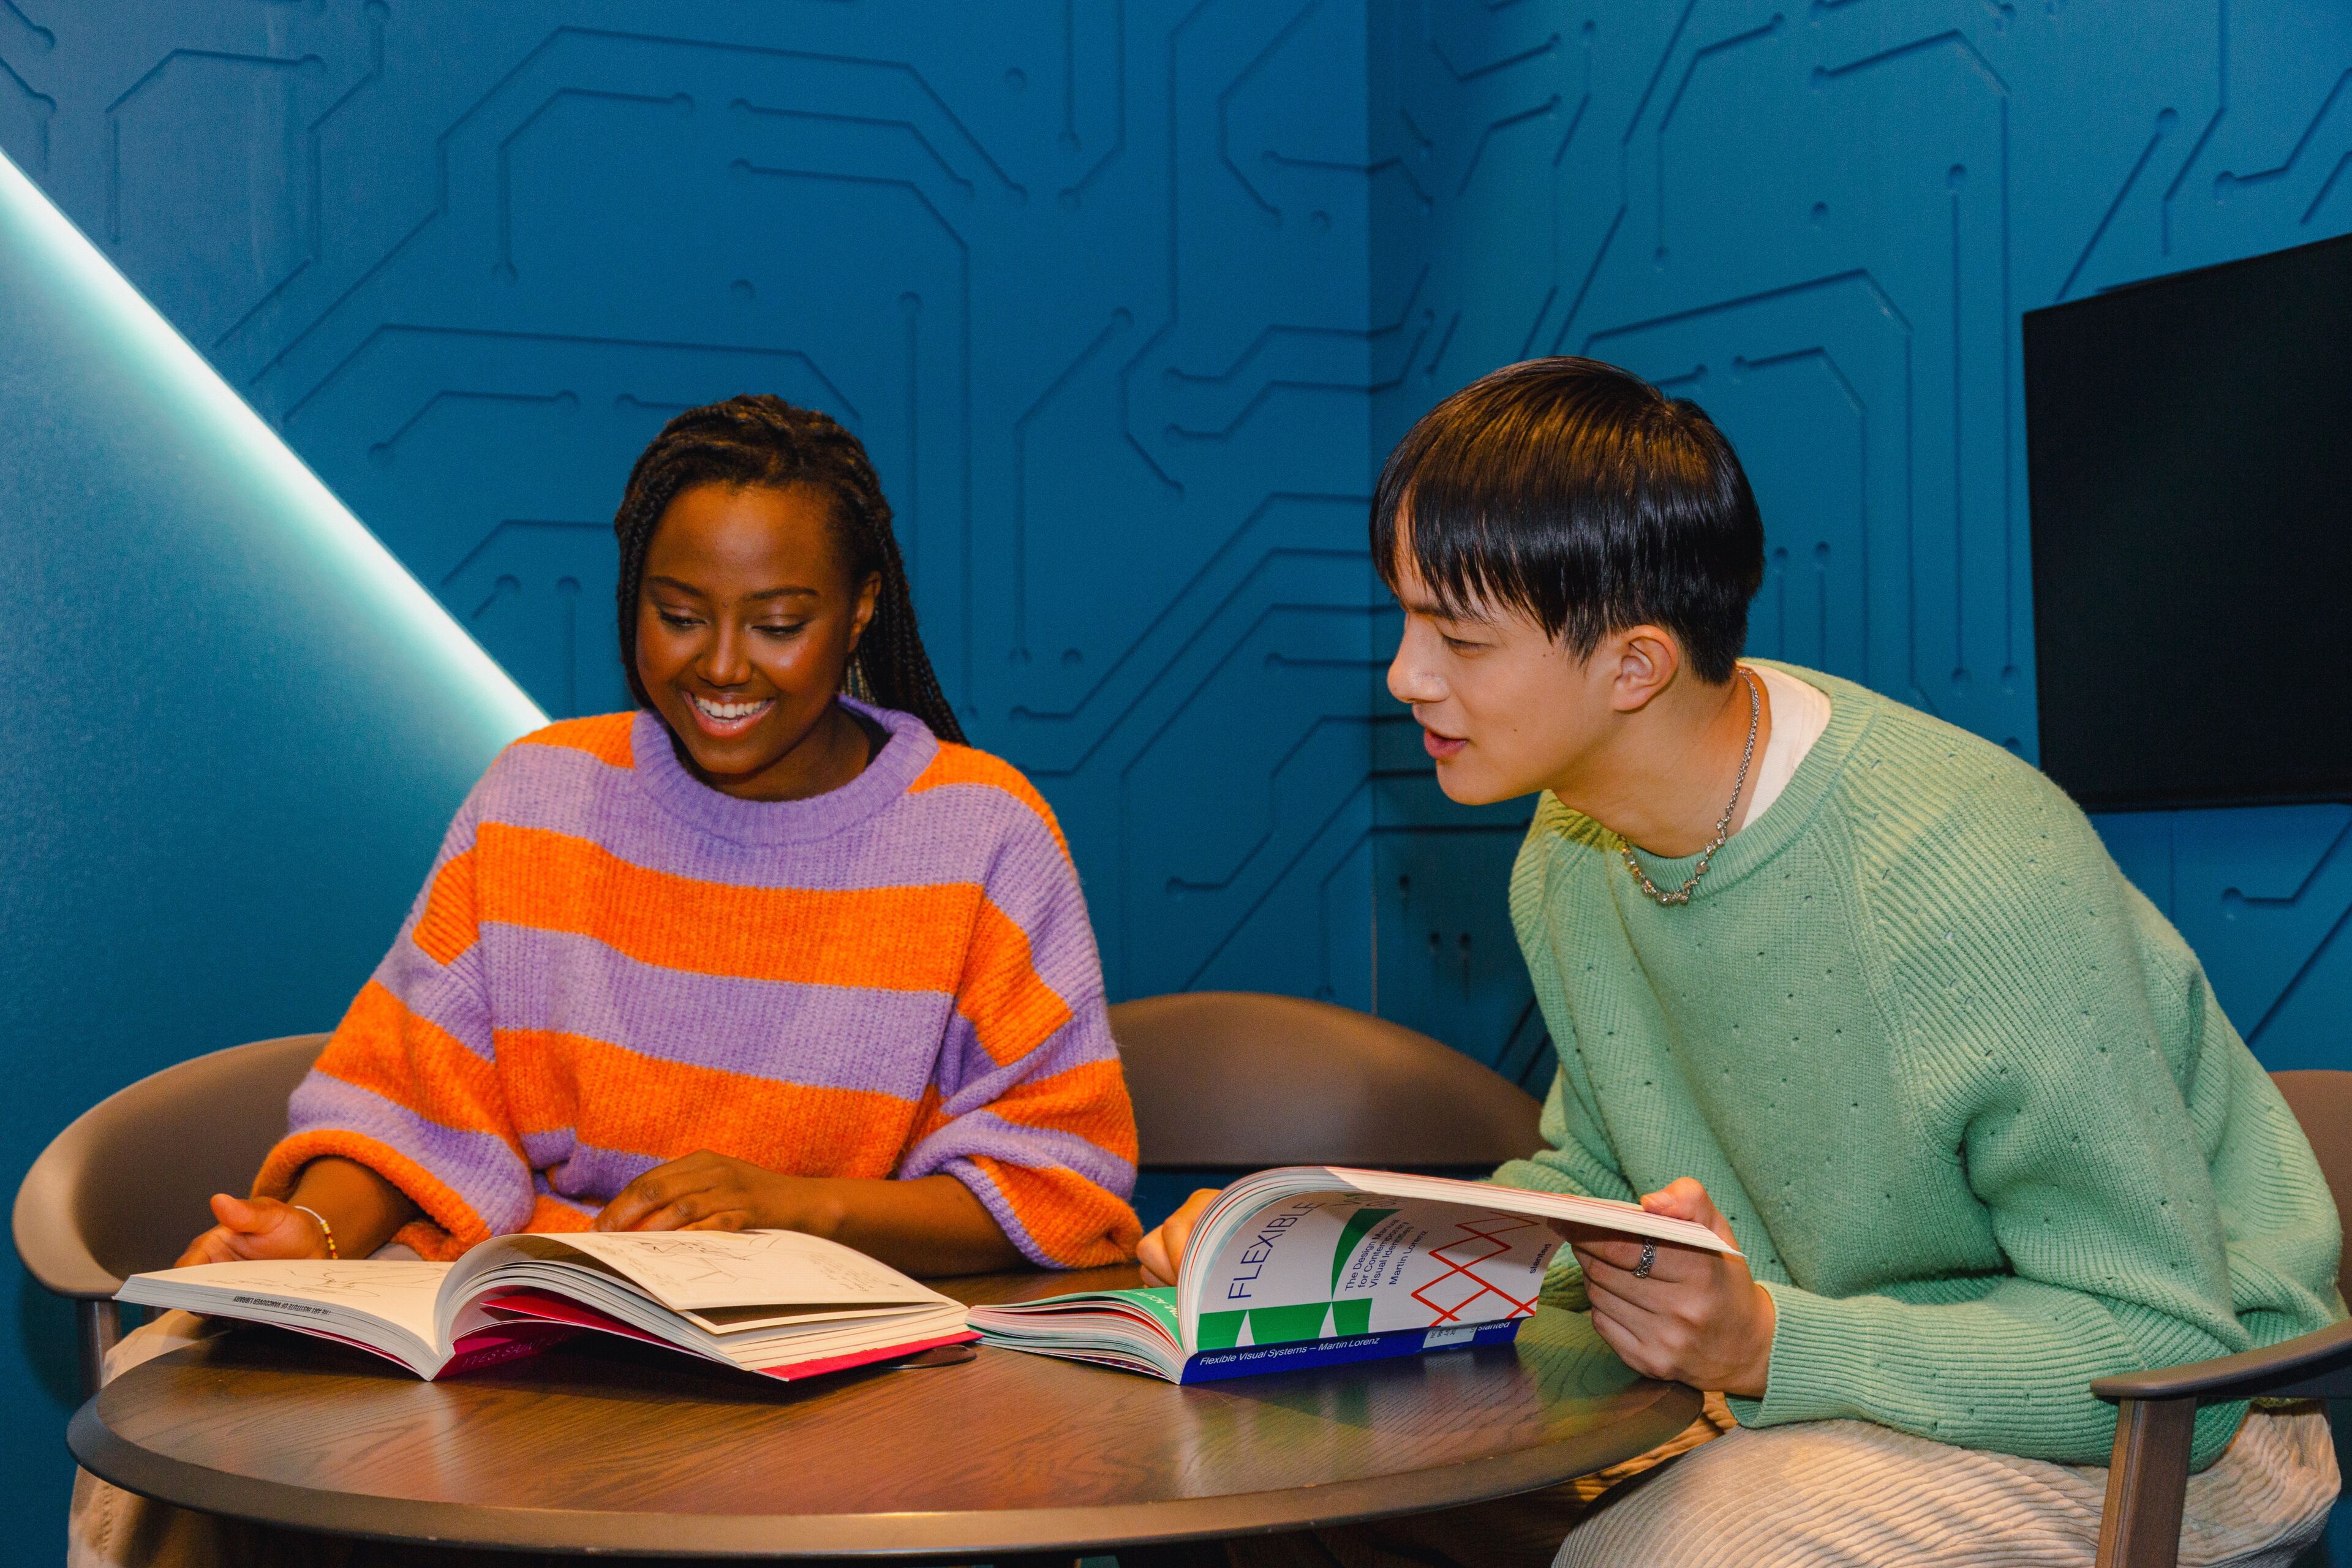 Two students, one in a striped sweater, review a book together in a vibrant study space.